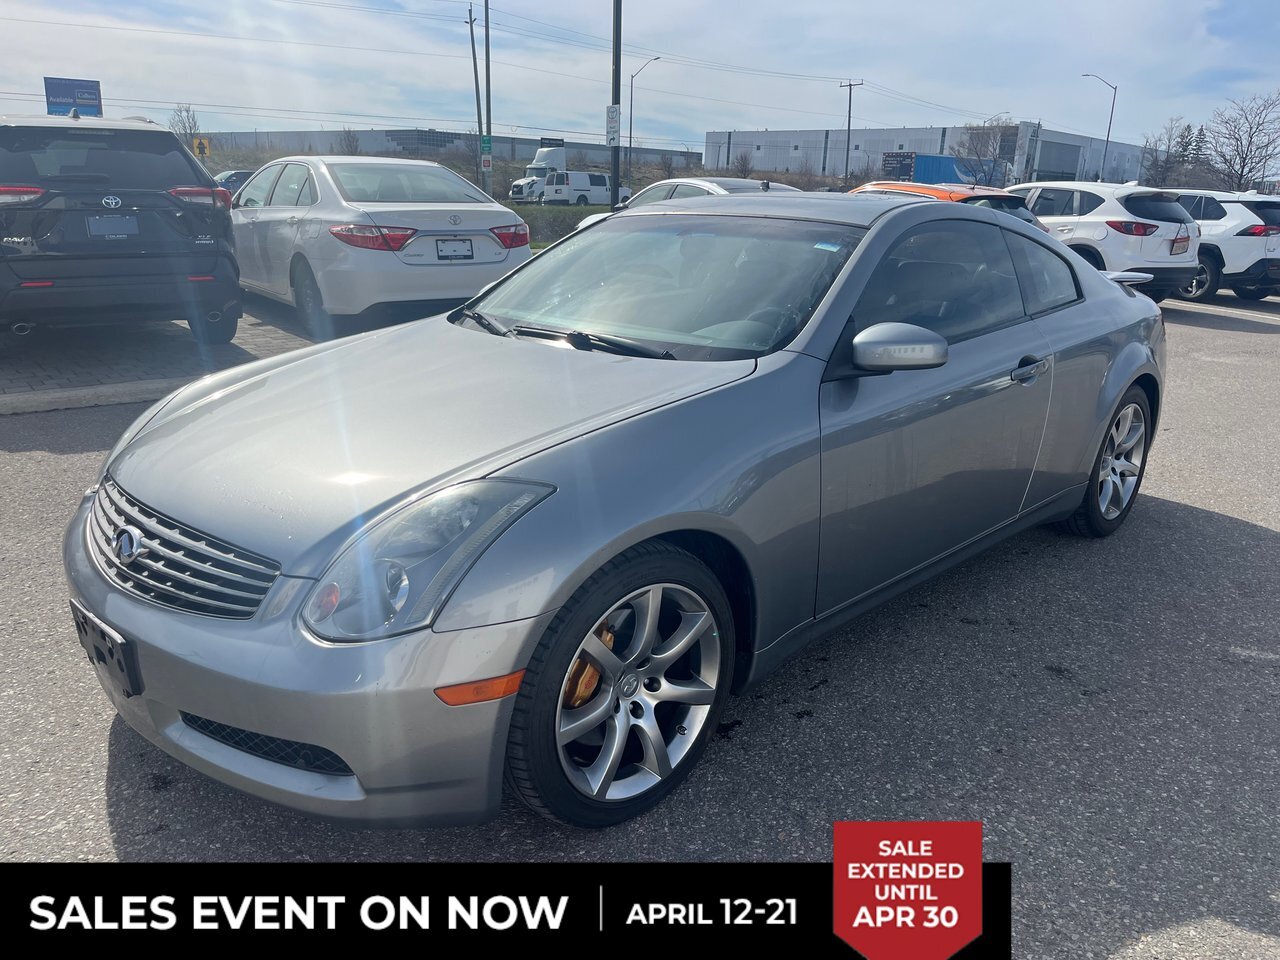 2004 Infiniti G35 Coupe 6sp *AS/IS* LEATHER SEATS | BOSE SOUNDSYSTEM